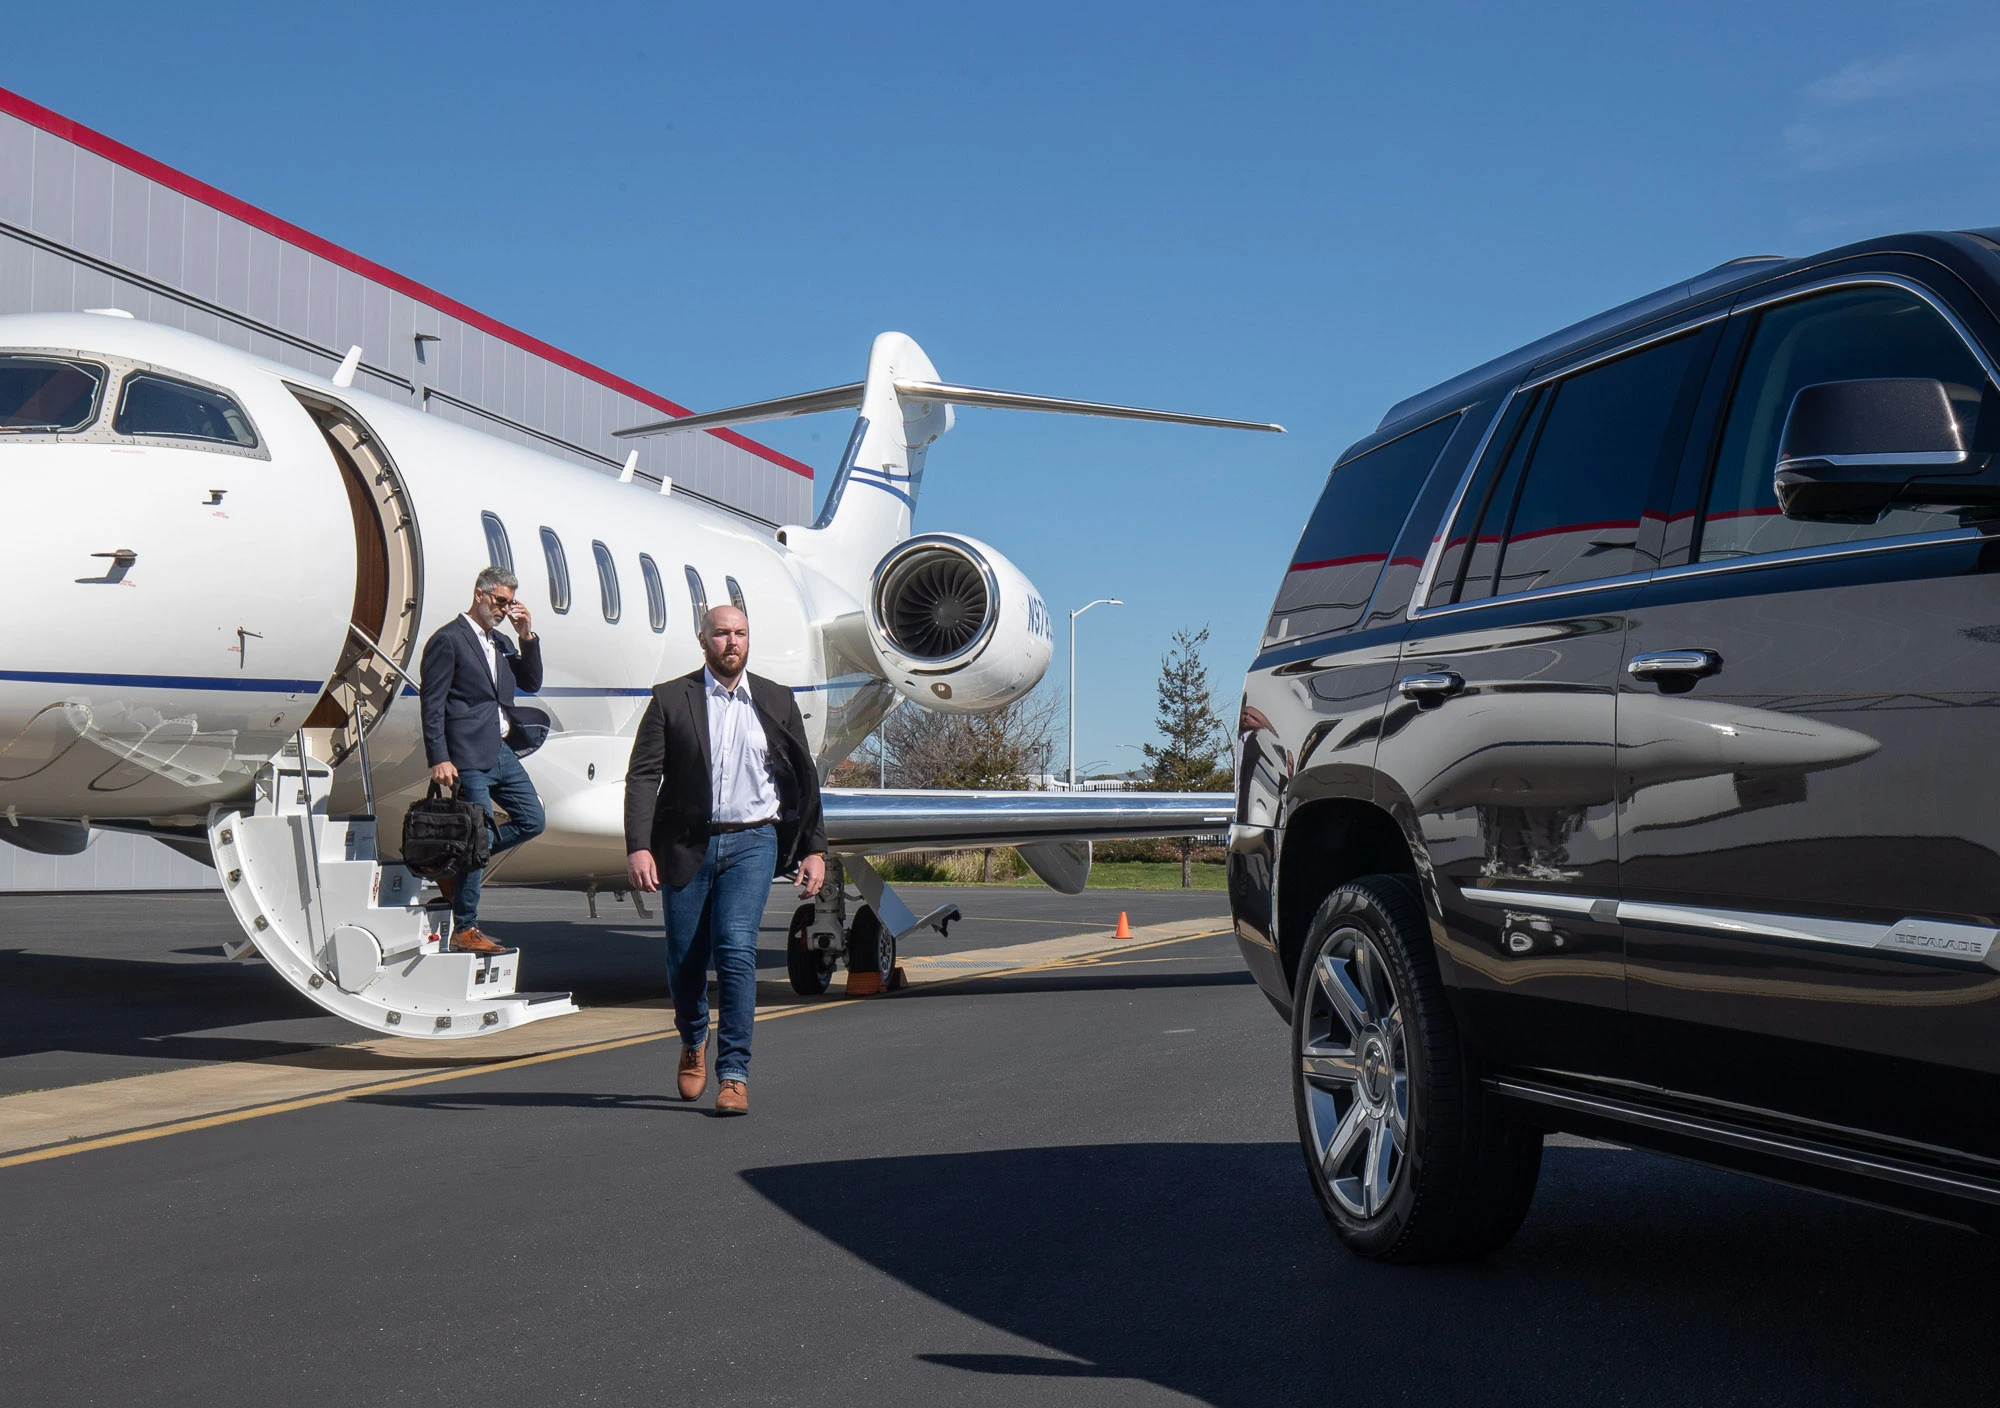 A picture of one of our luxury vehicles and out customer walking towards it from a private jet in an FBO facility private airport